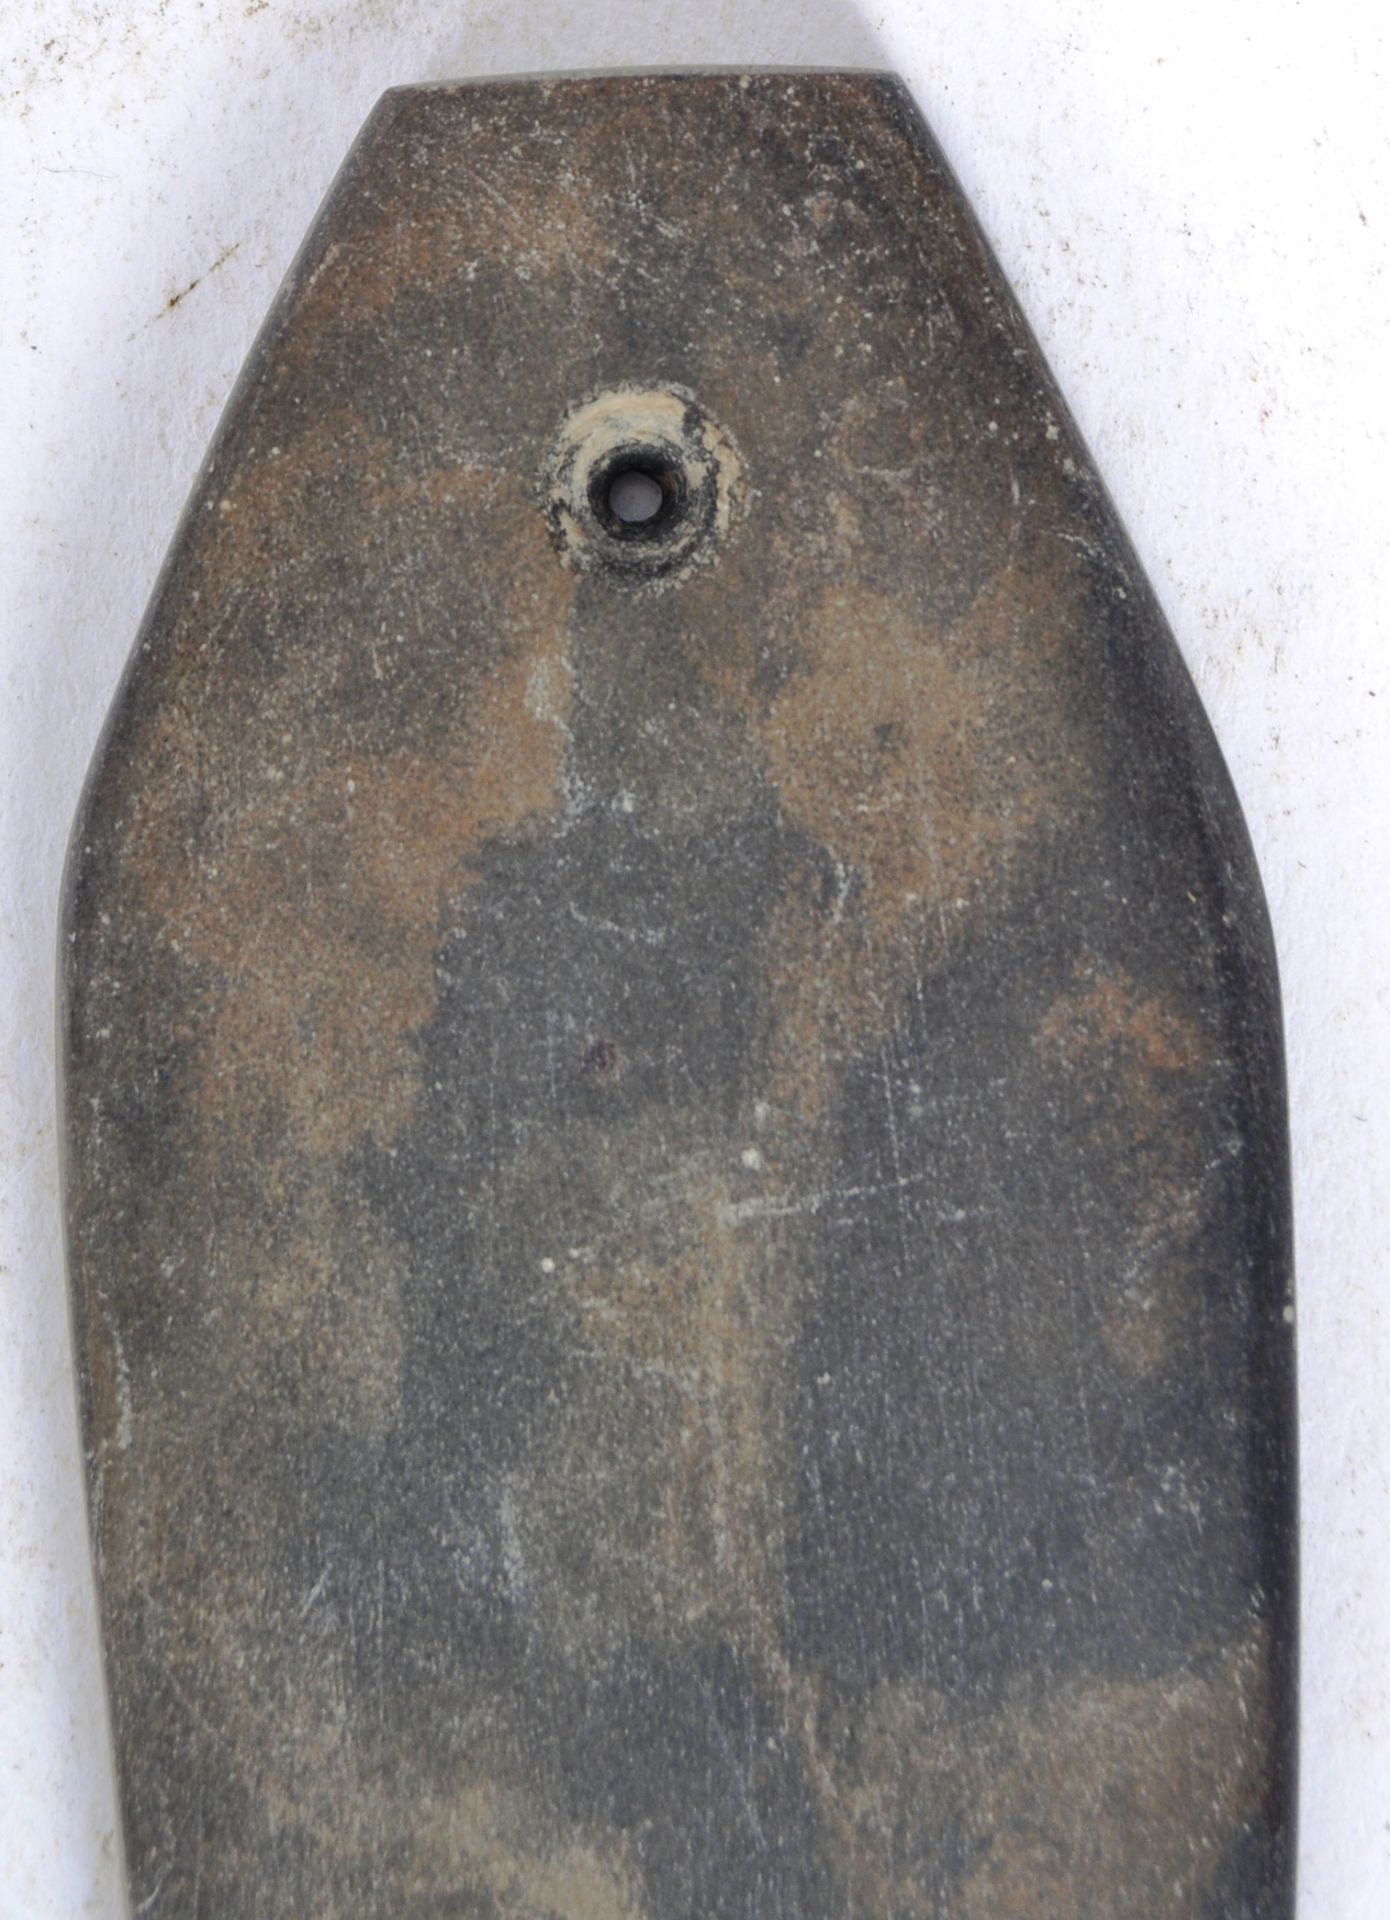 TWO HONGSHAN CULTURE CHINESE NEOLITHIC JADE AXE HEADS - Image 5 of 5